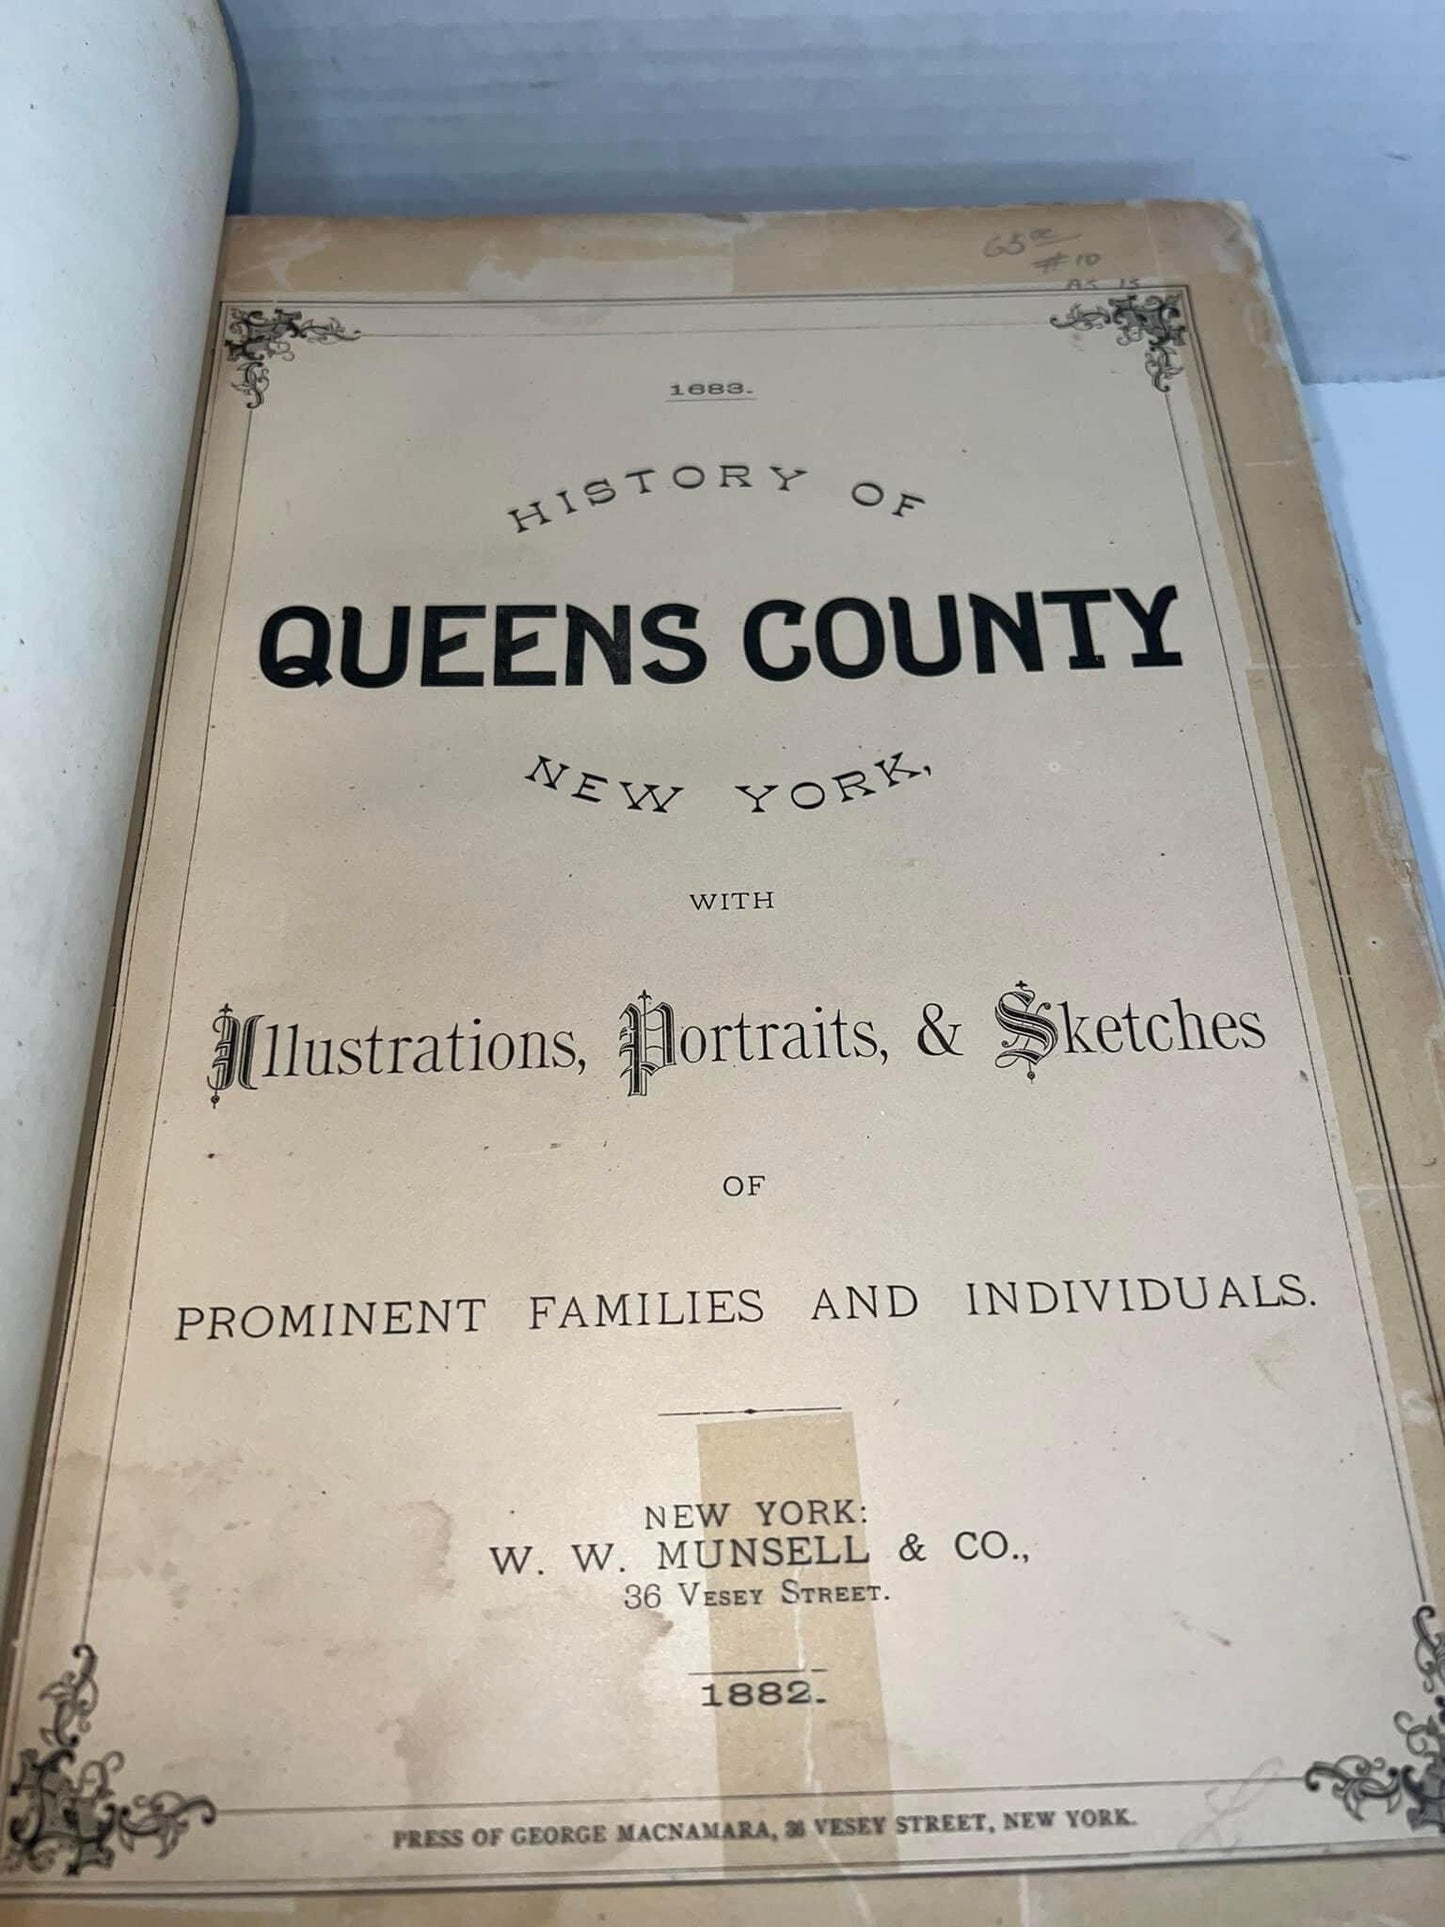 Antique Victorian 1882 history of queens county New York Long Island